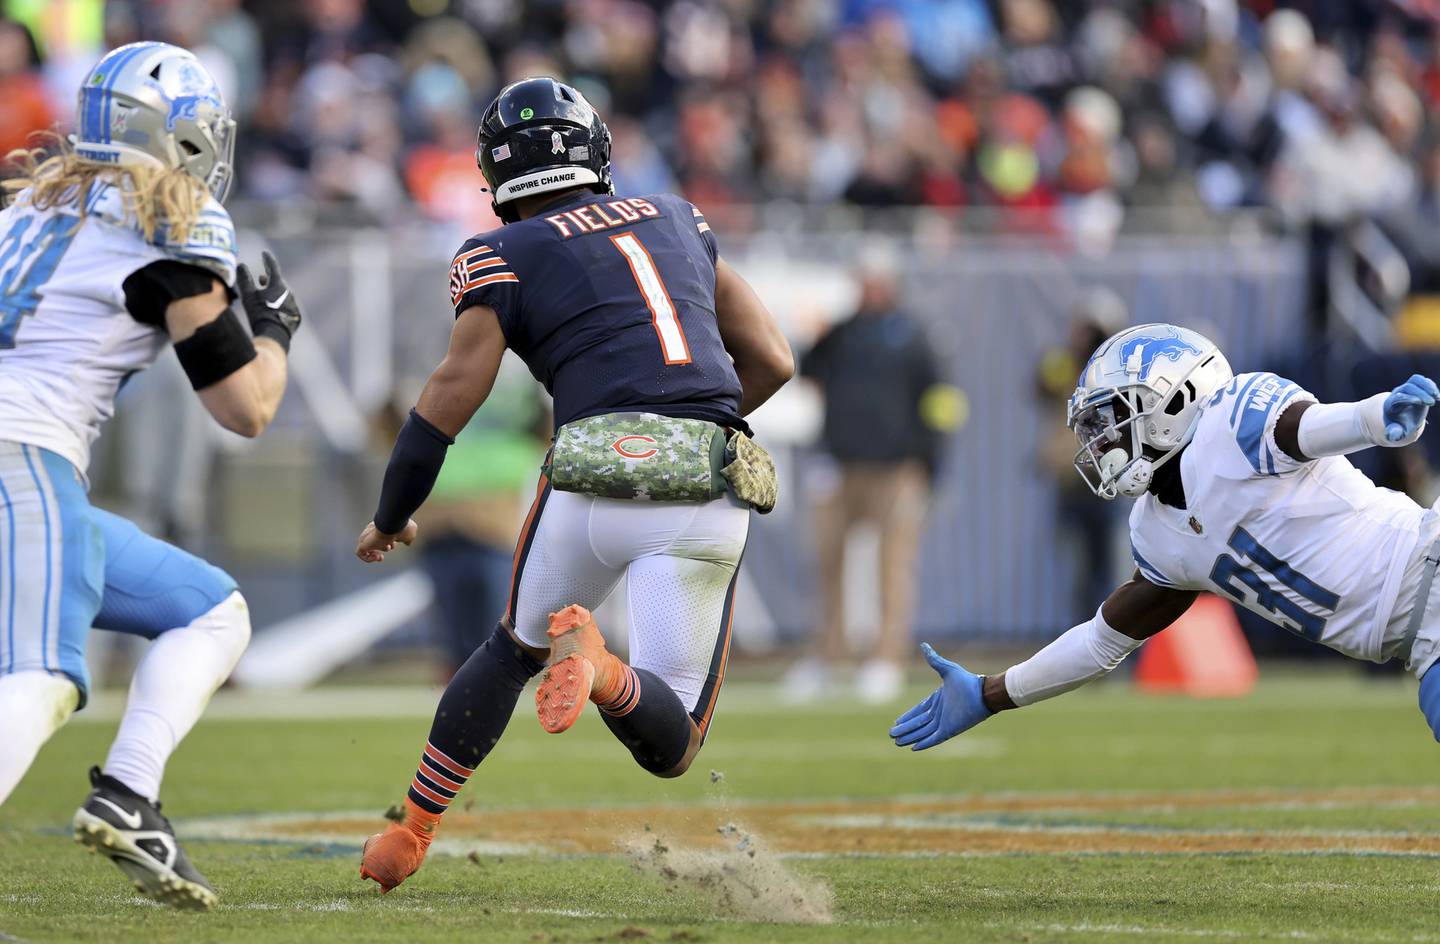 Bears quarterback Justin Fields finds a hole in the against the Lions at Soldier Field on Nov. 13, 2022.